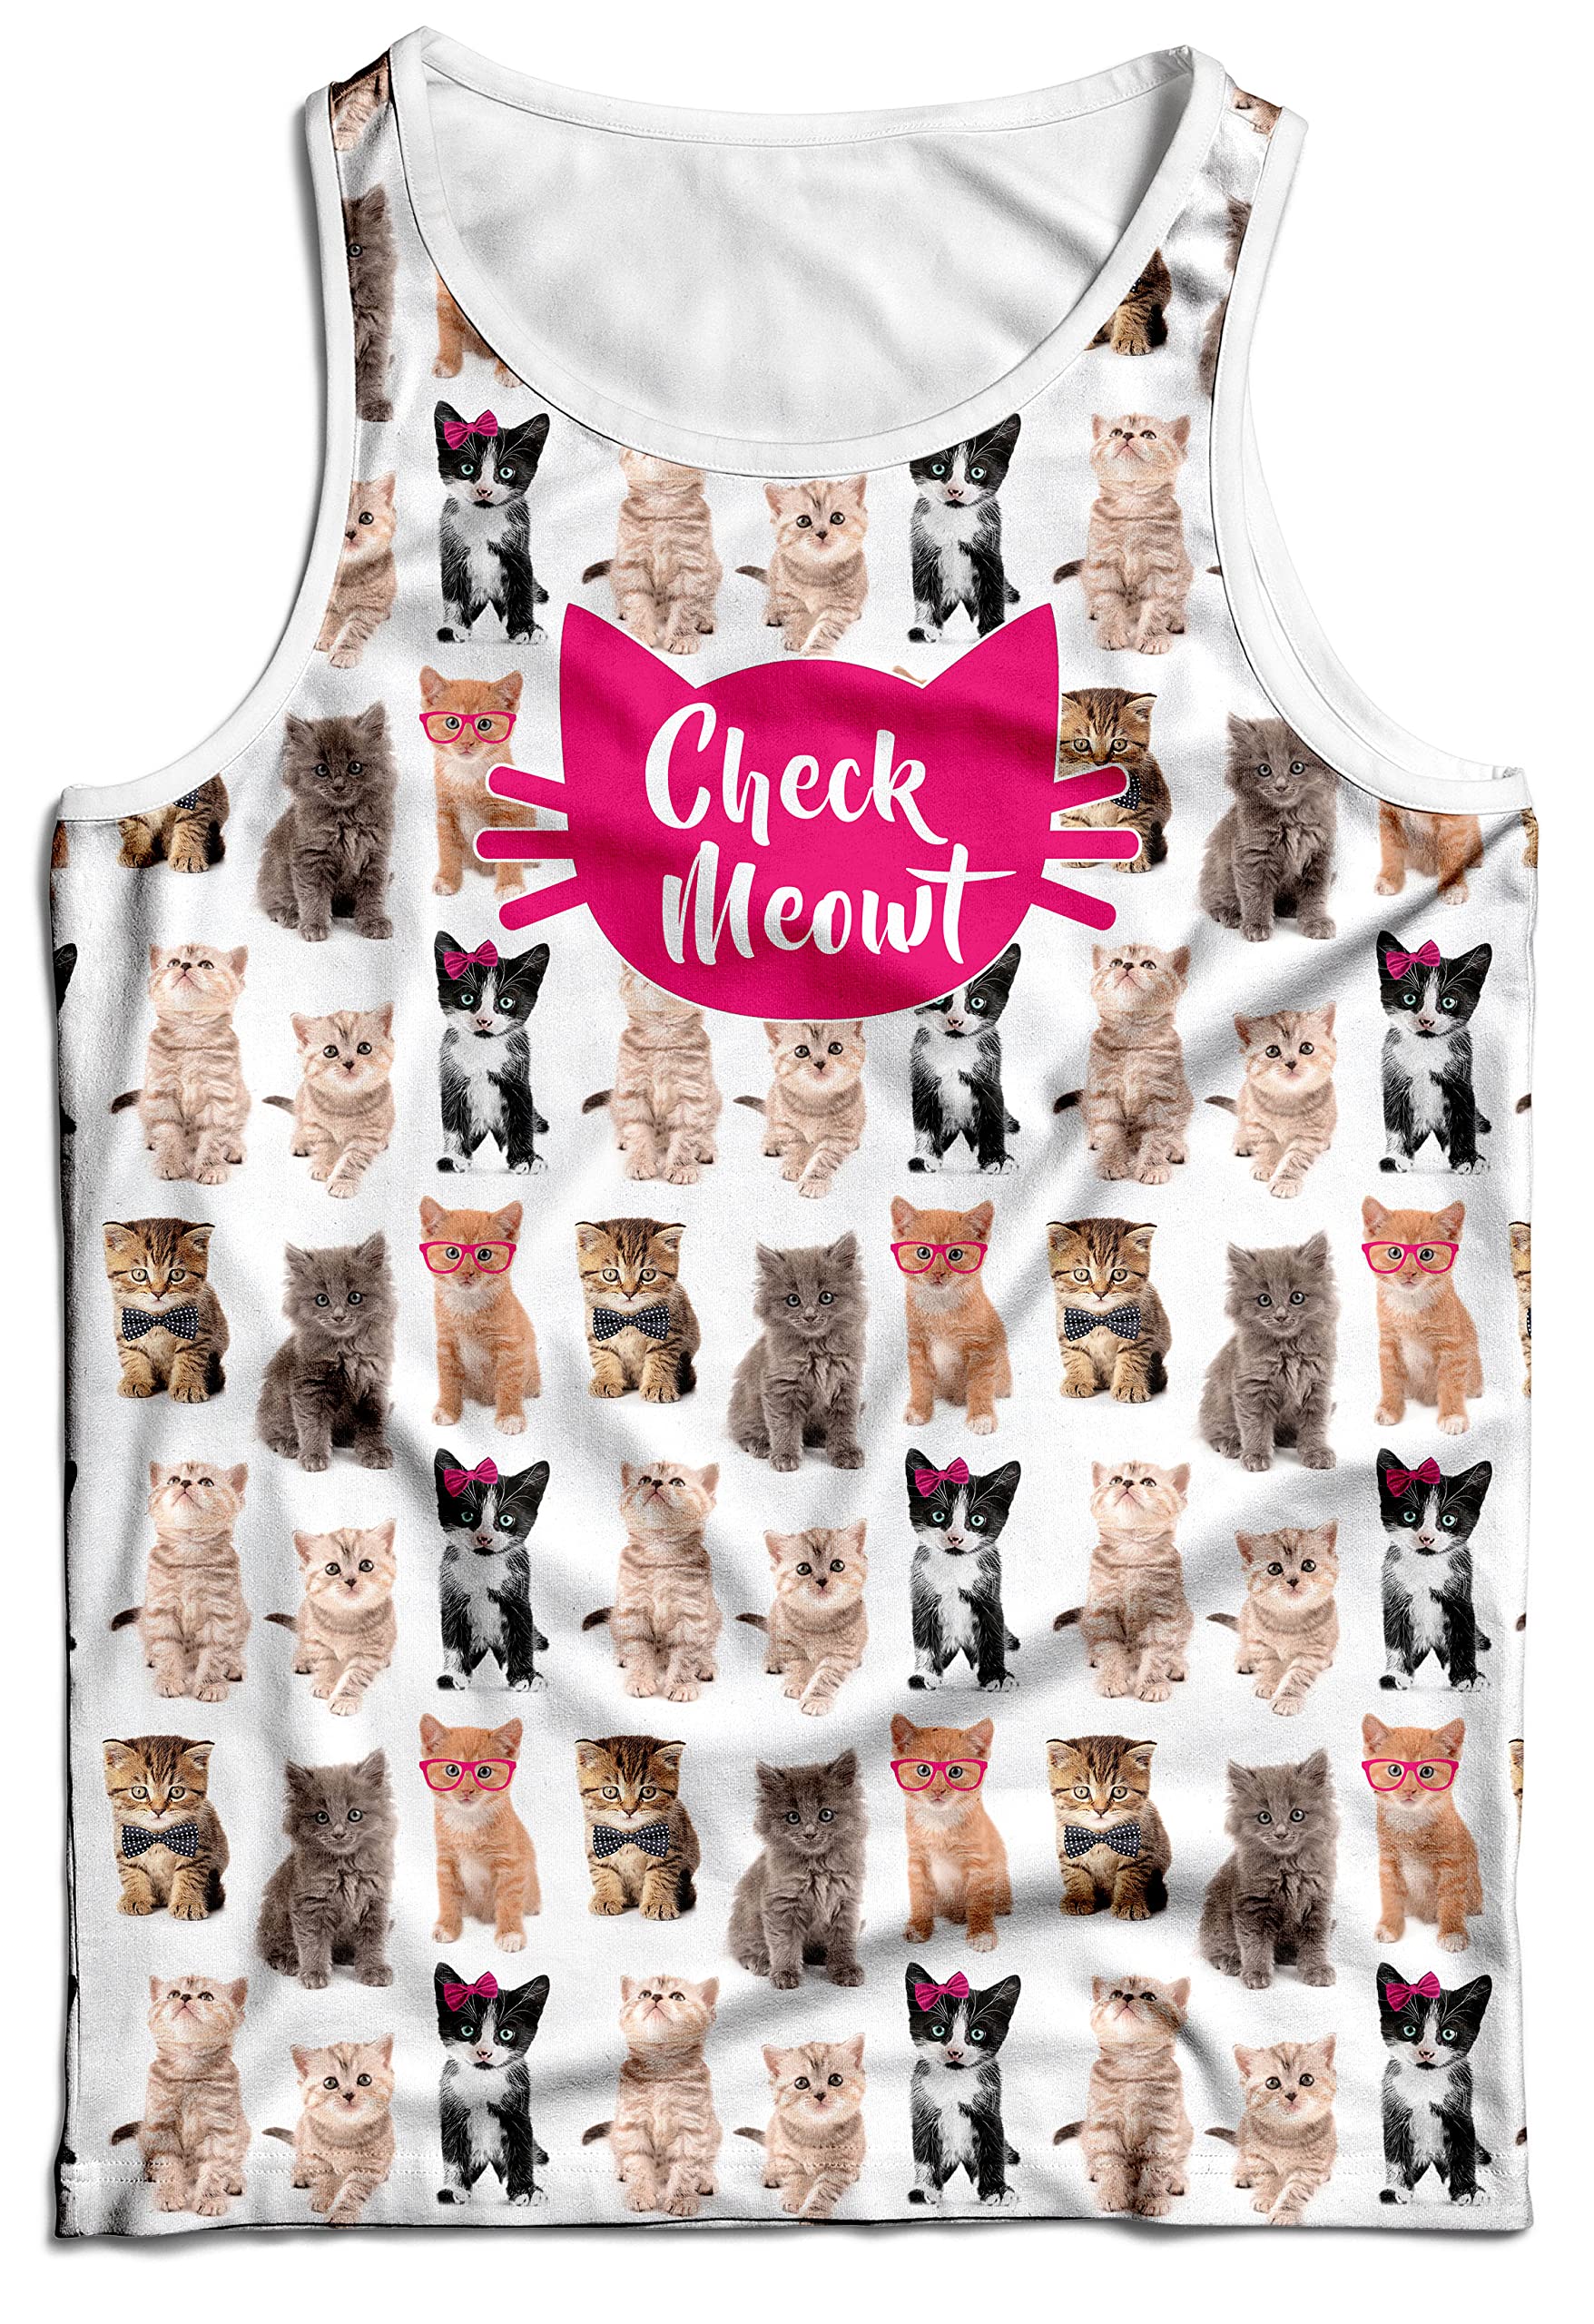 BRIEF INSANITY Check Meowt Cat Themed Tank Top